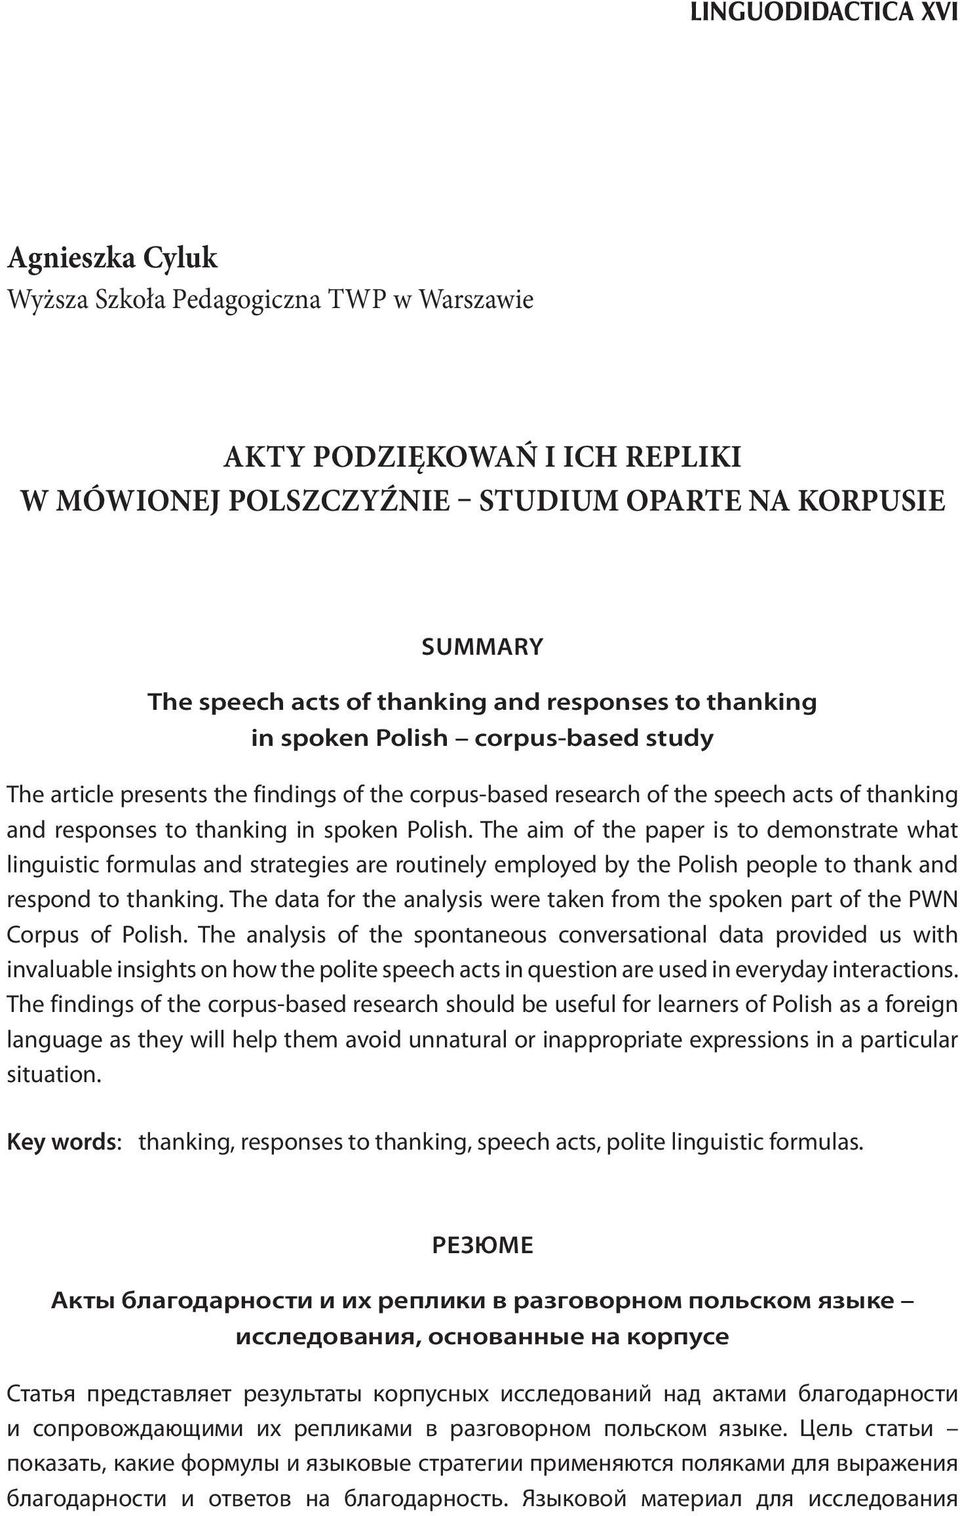 The aim of the paper is to demonstrate what linguistic formulas and strategies are routinely employed by the Polish people to thank and respond to thanking.